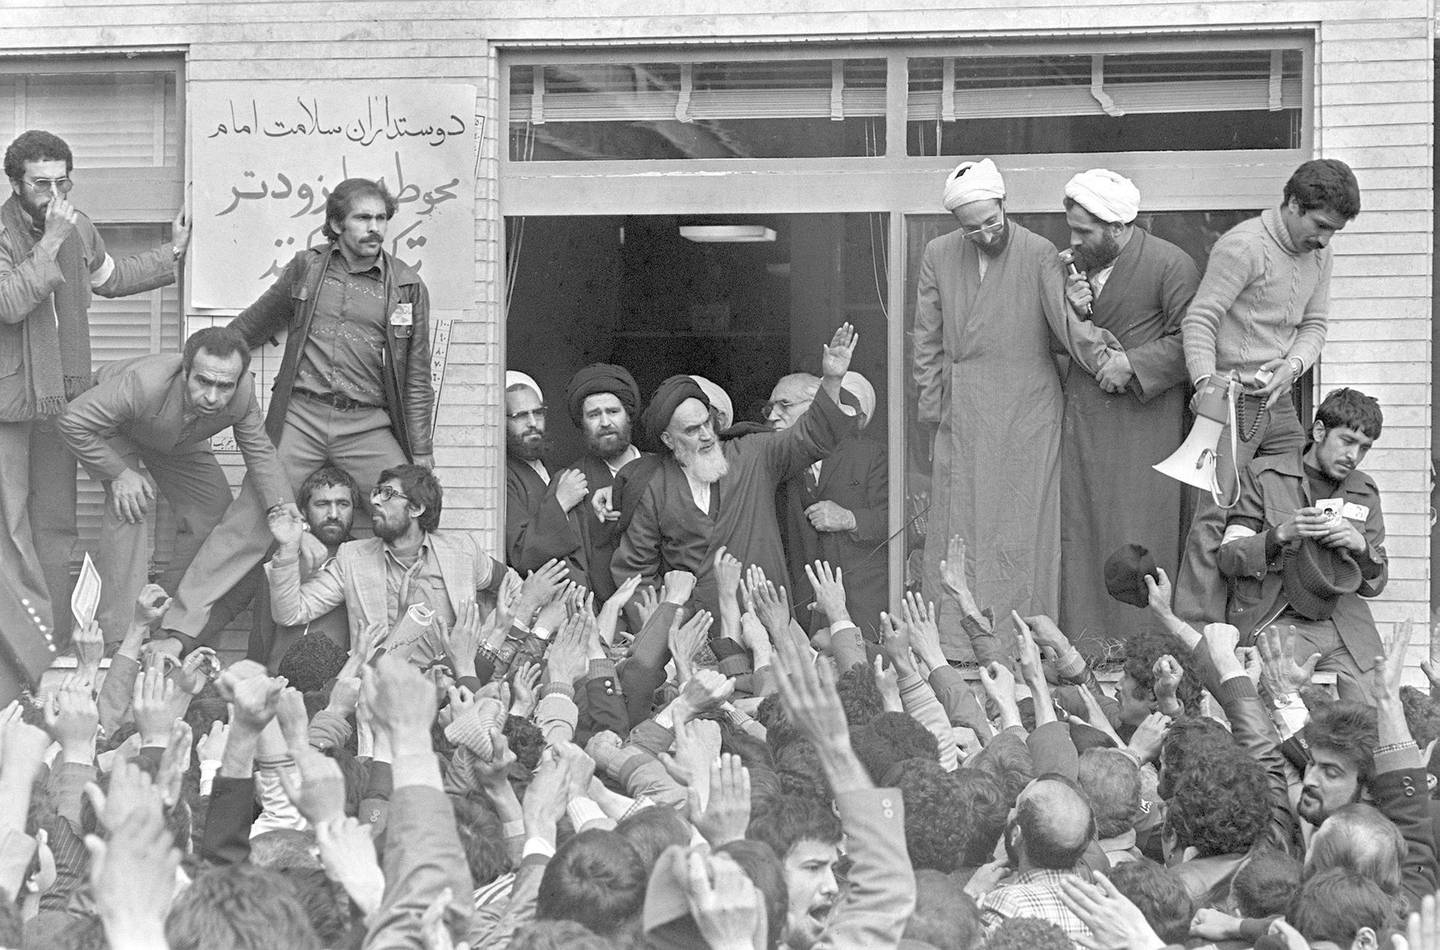 FILE - In this Feb. 1, 1979 file photo, Ayatollah Ruhollah Khomeini, center, waves to followers as he appears on the balcony of his headquarters in Tehran, Iran. Friday, Feb. 1, 2019 marks the 40th anniversary of Khomeini's arrival in Iran, setting the stage for the country's 1979 Islamic Revolution that changed the country‚Äôs history for decades to come. (AP Photo/Campion, File)